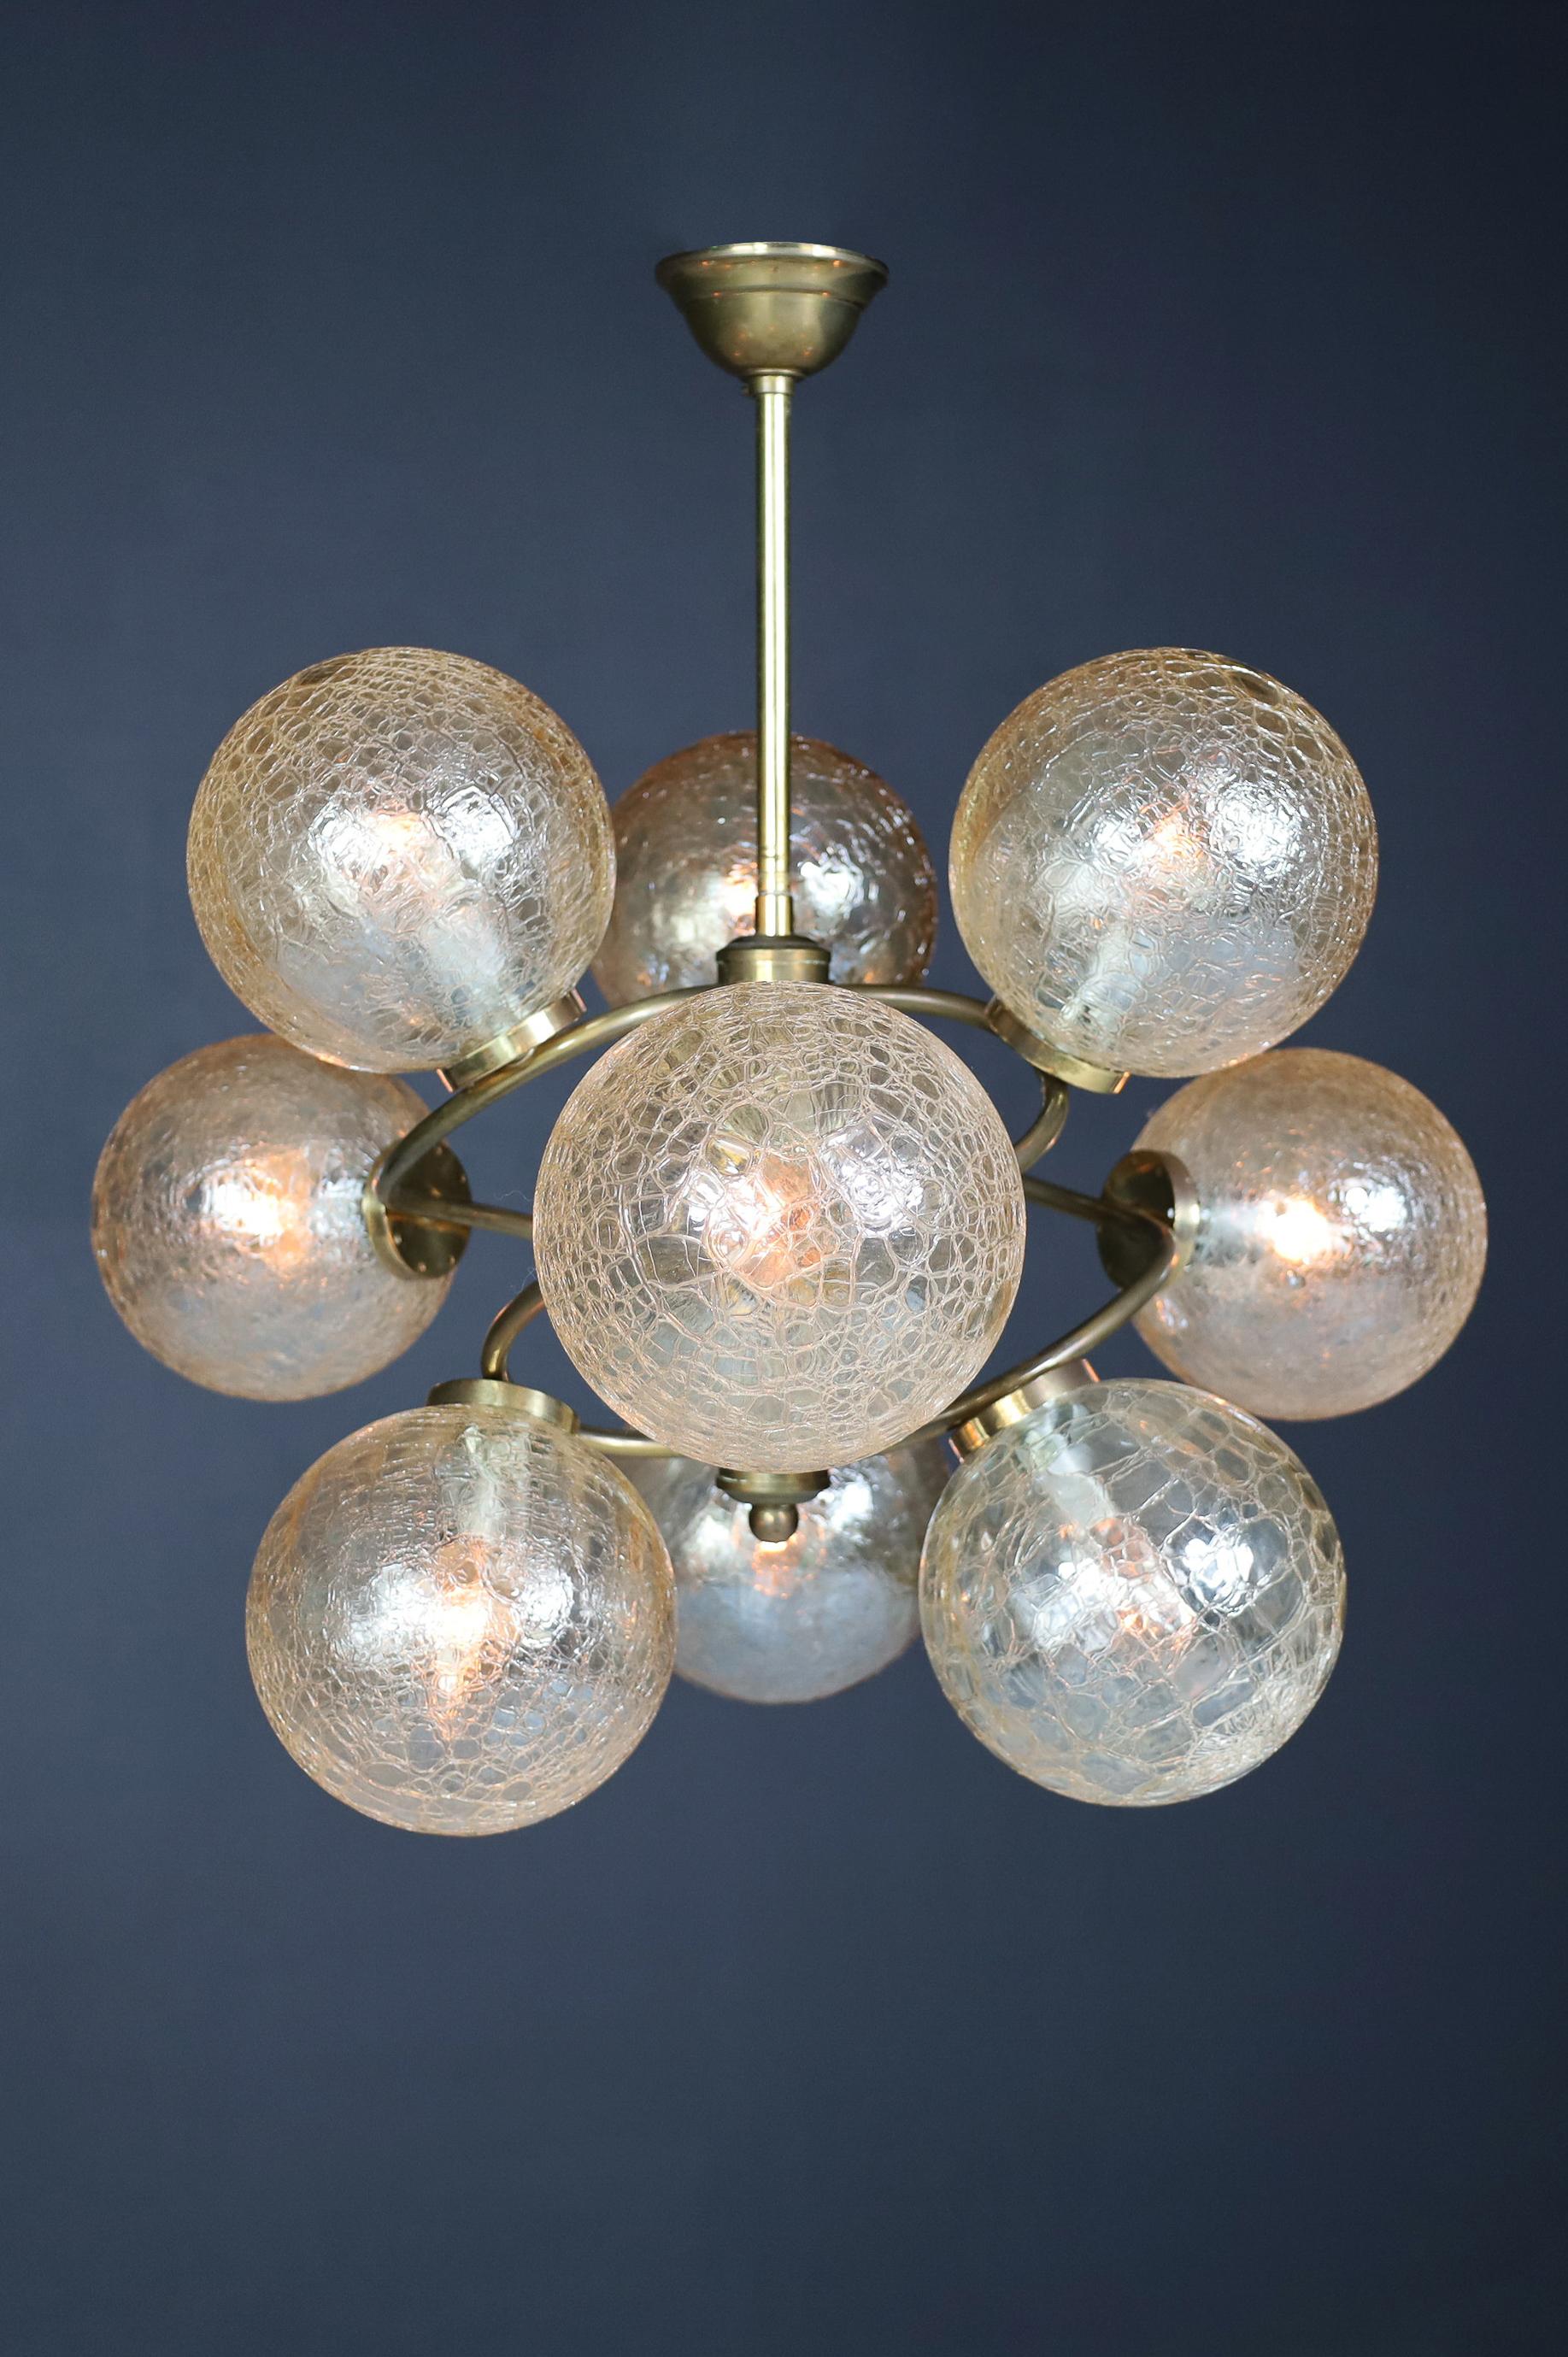 Patinated Brass Chandelier Wit Nine Amber-Colored Globes, Germany 1960s For Sale 2